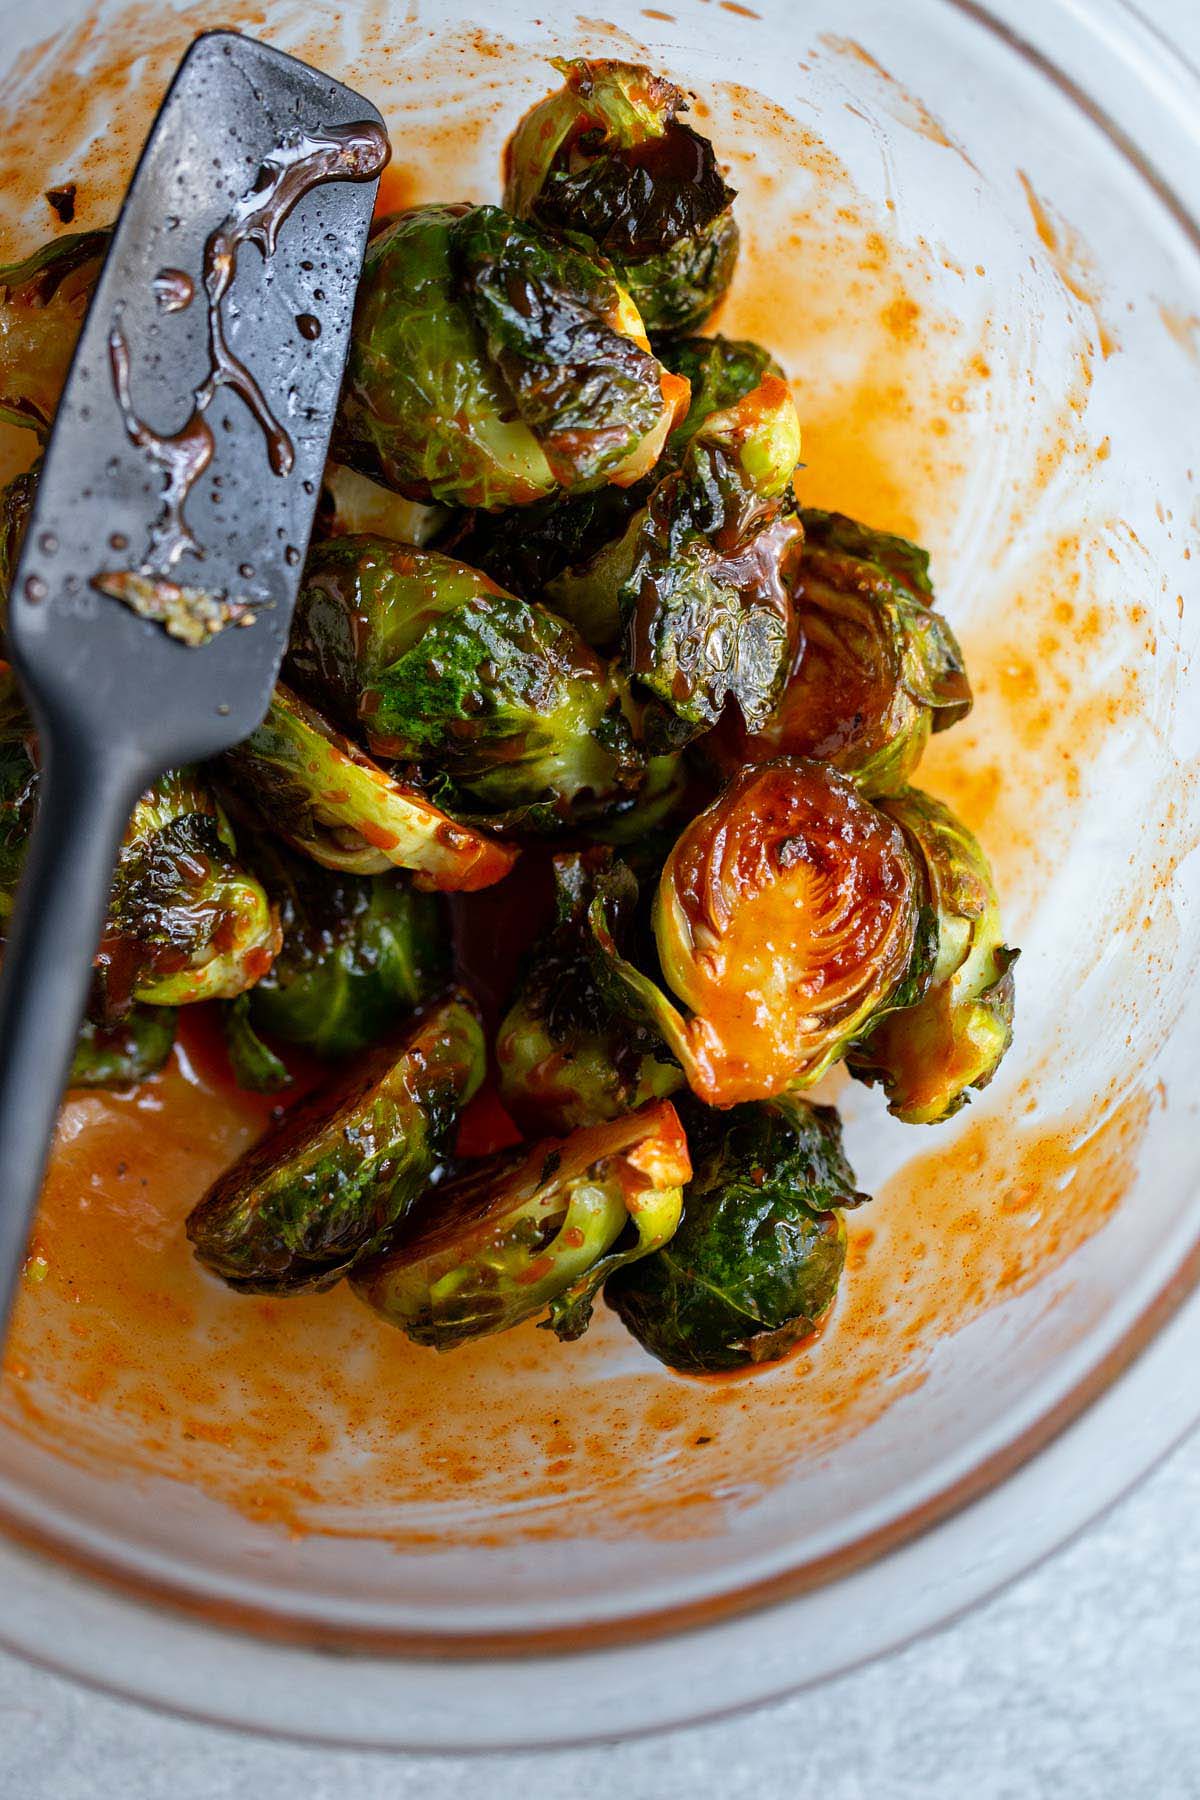 Brussels sprouts tossed with gochujang sauce.